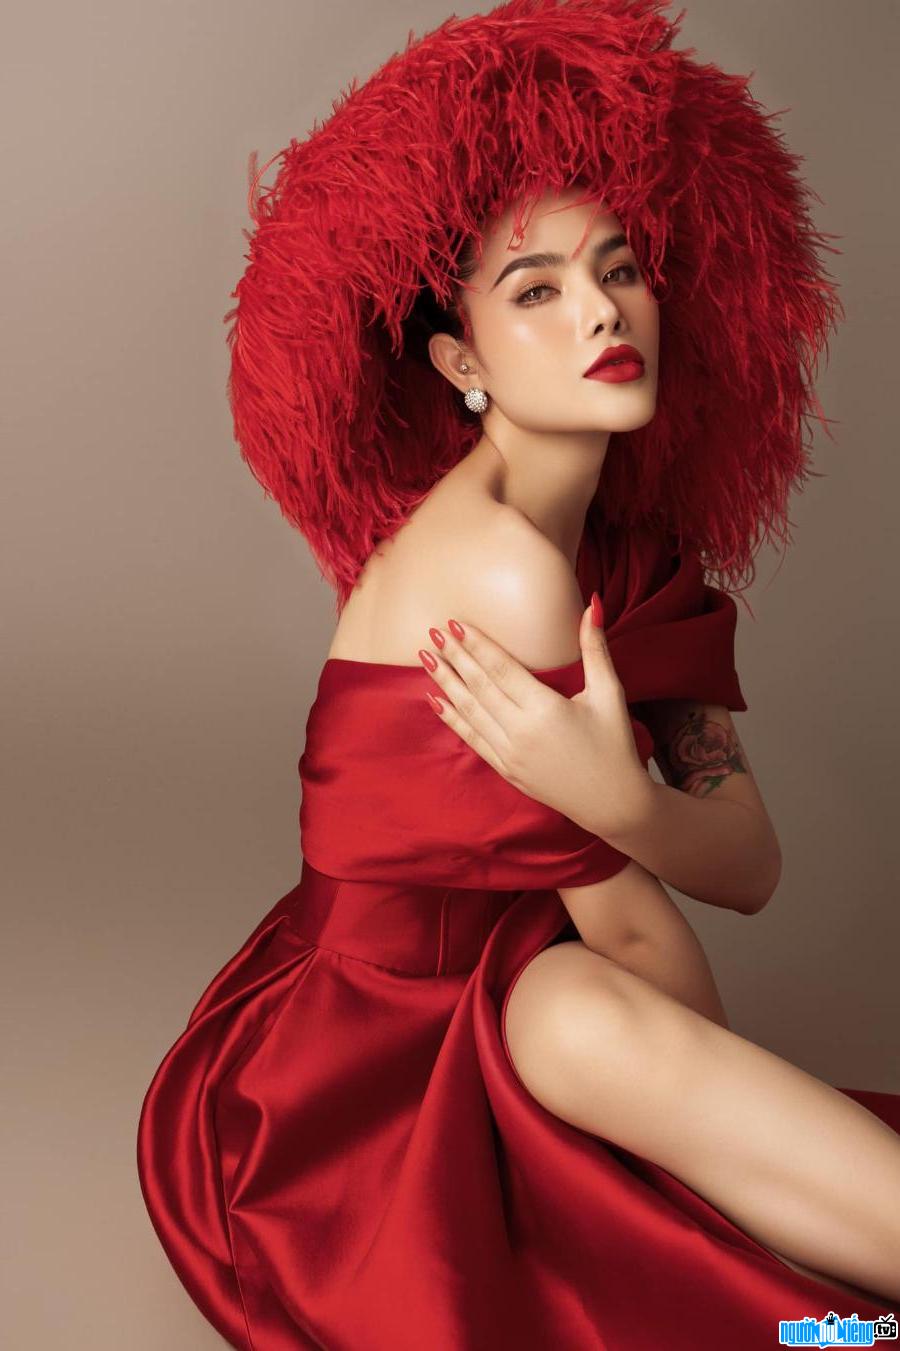  Model Pham Ngoc Vi believes that women must first learn to love themselves.